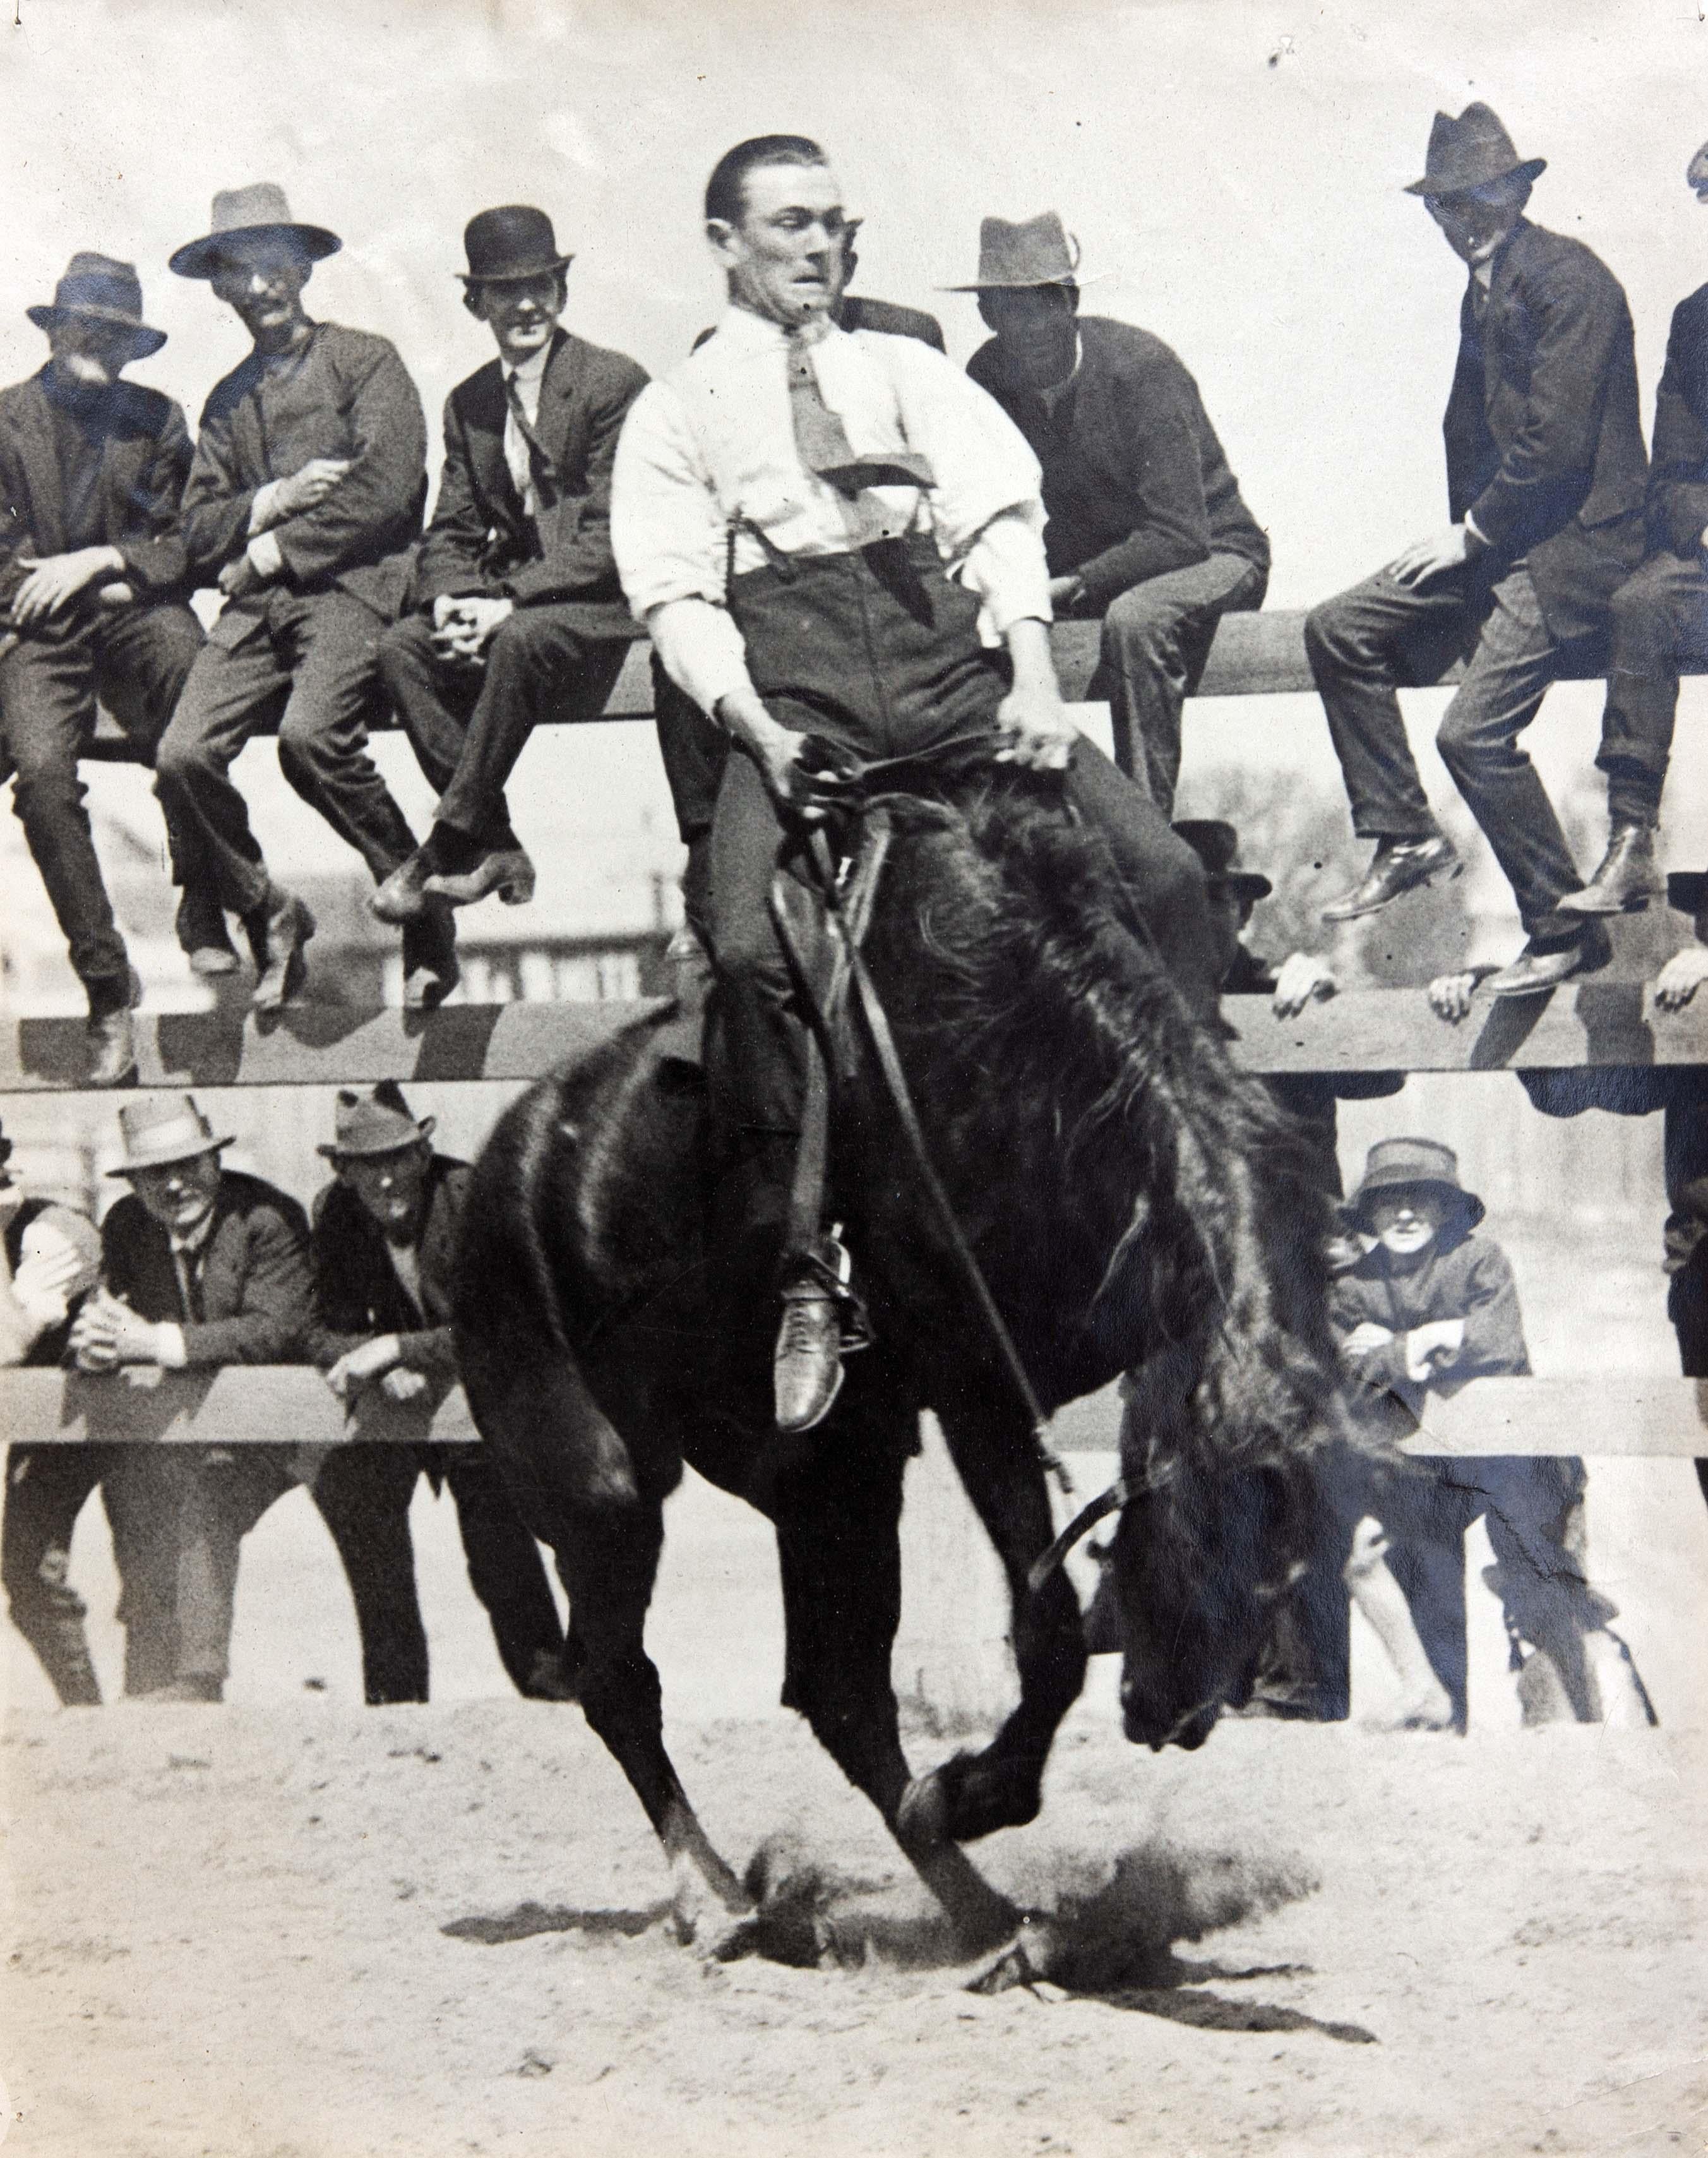 Paper Vintage Bucking Bronco Rodeo Photograph, Early 20th Century